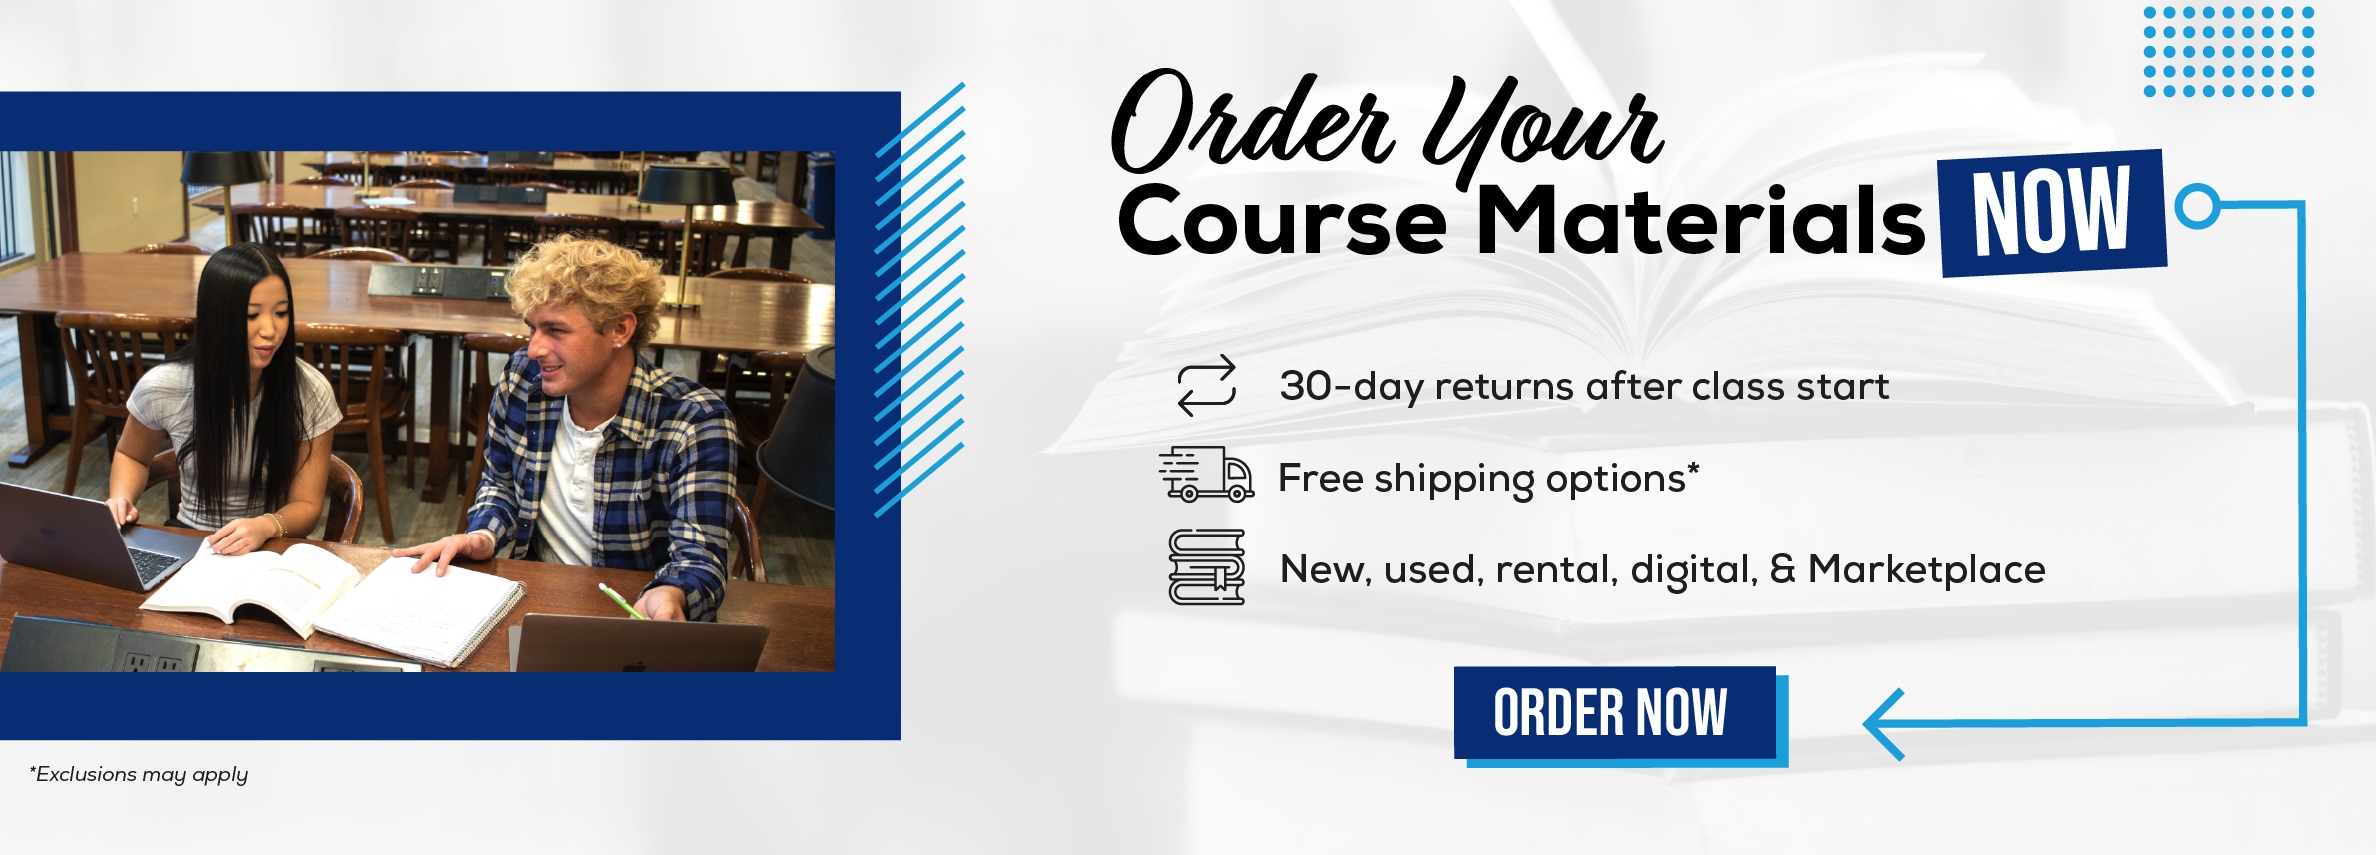 Order Your Course Materials Now. 30-day returns after class start. Free shipping options*. New, used, rental, digital, & Marketplace. Order now. *Exclusions may apply.